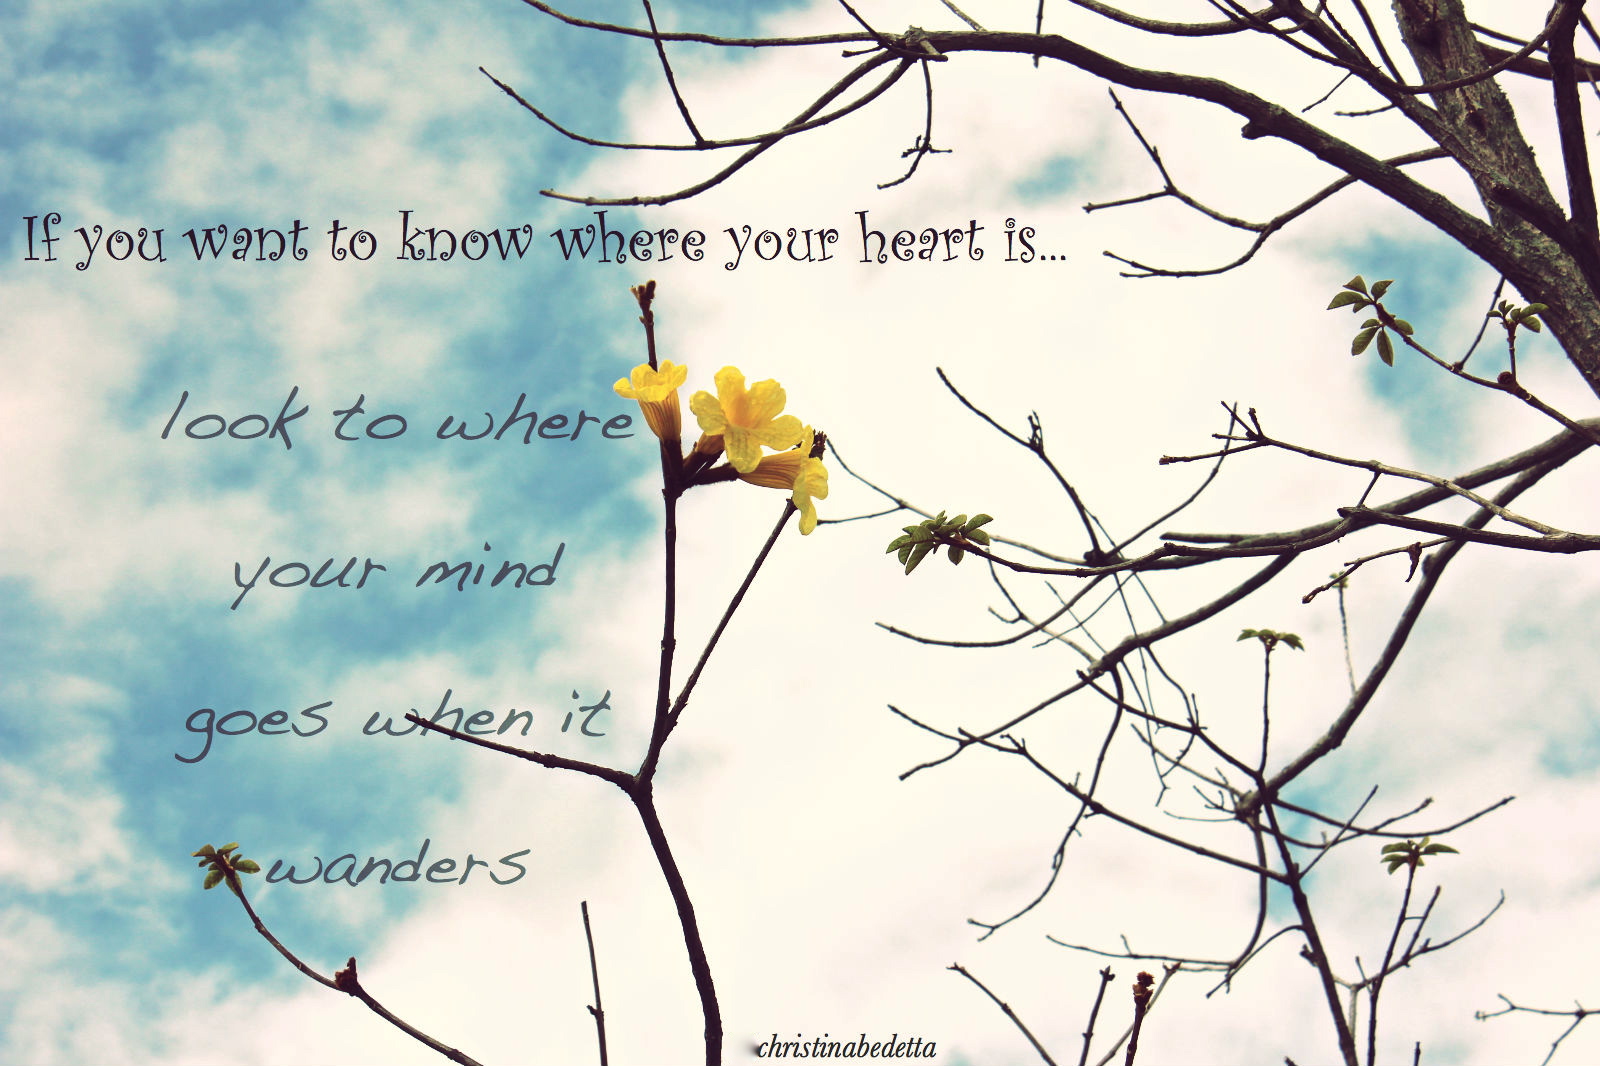 If You Want To Know Where Your Heart Is...look To Where Your Mind Goes When It Wanders." - Create. Nourish. Love.